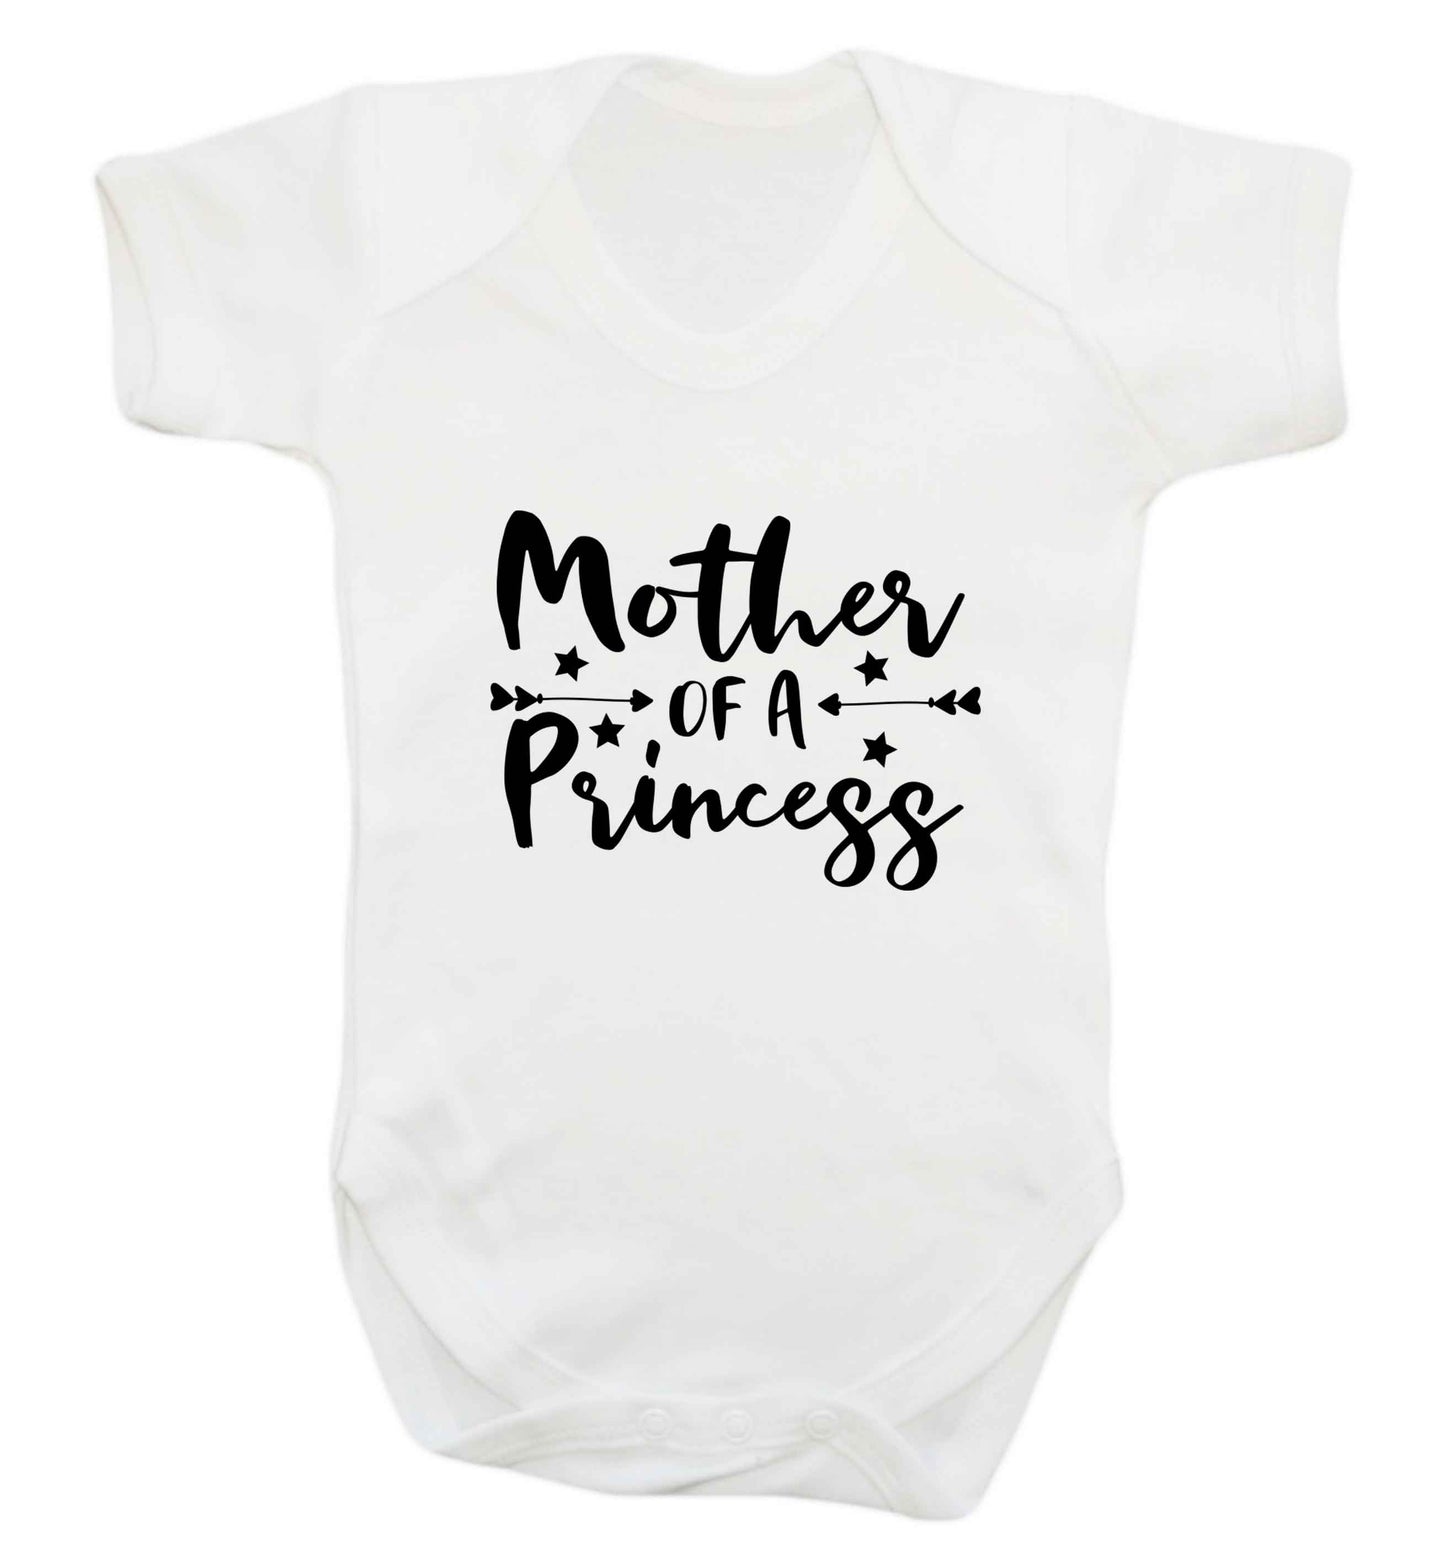 Mother of a princess baby vest white 18-24 months